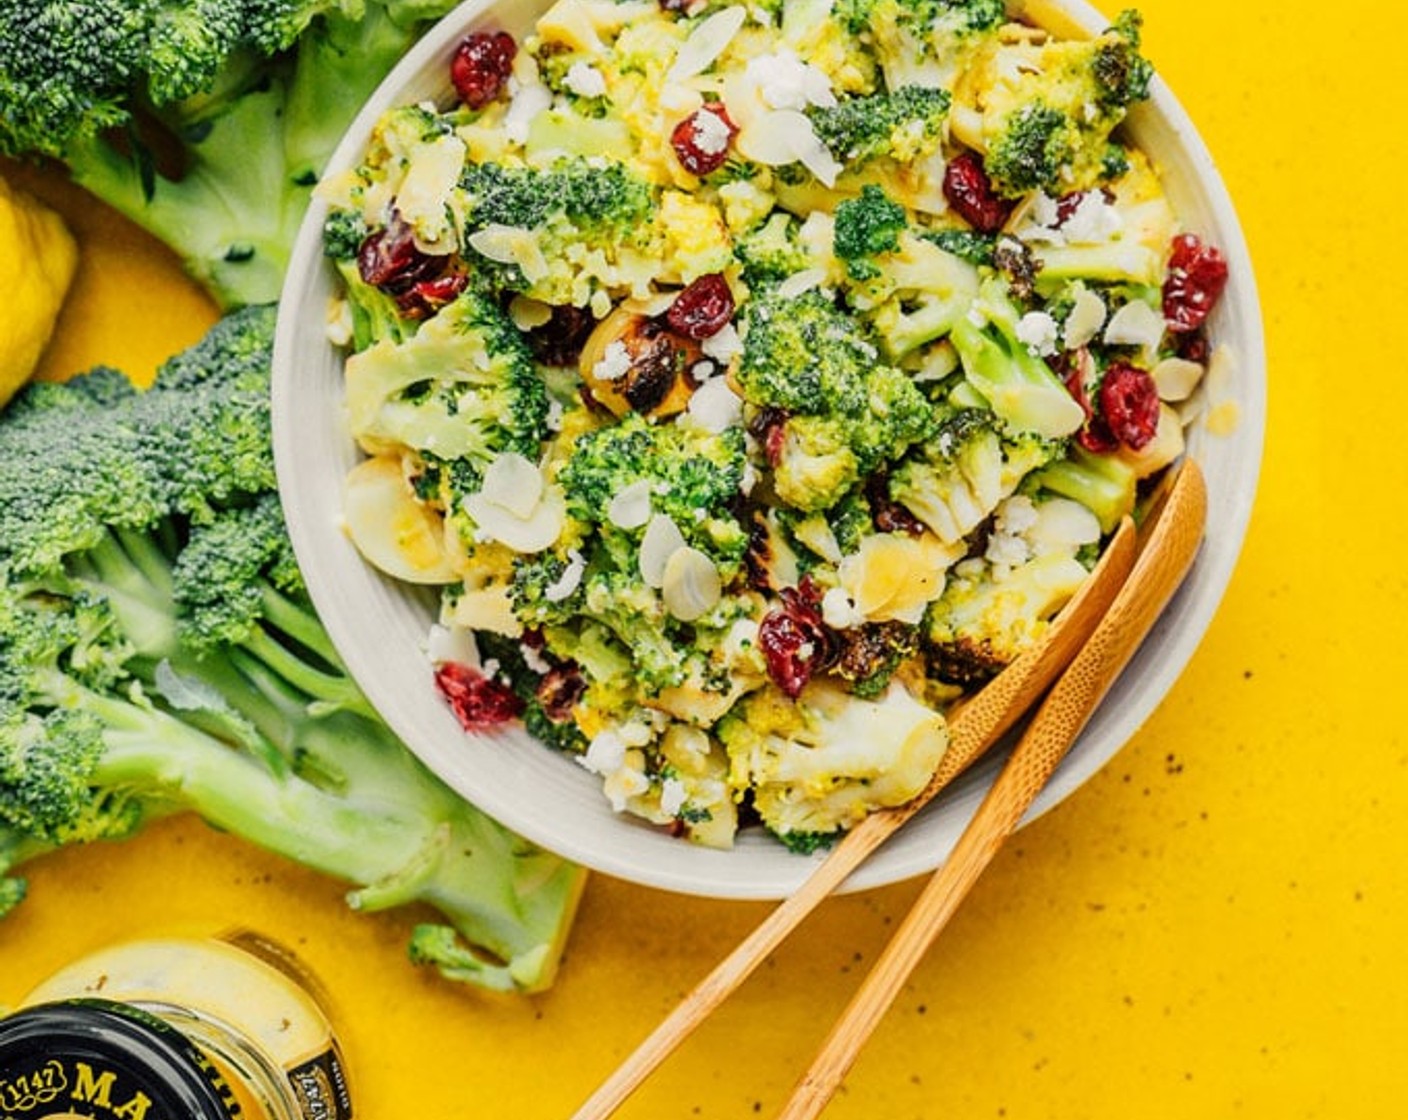 Grilled Broccoli Salad with Honey Mustard Dressing